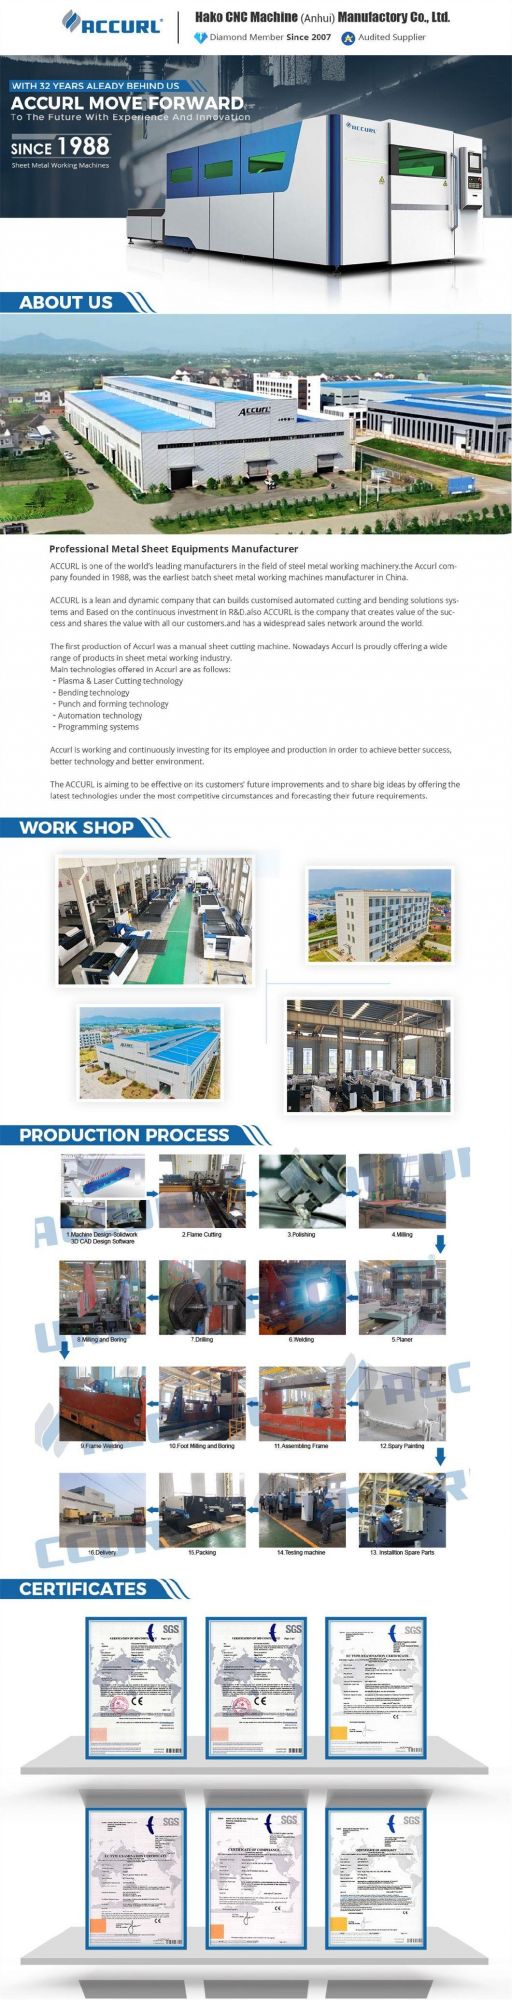 500 Tons H Frame Hydraulic Press Tools for Compression Moulding of SMC Sheet 500t H Type Hydraulic Press Machine